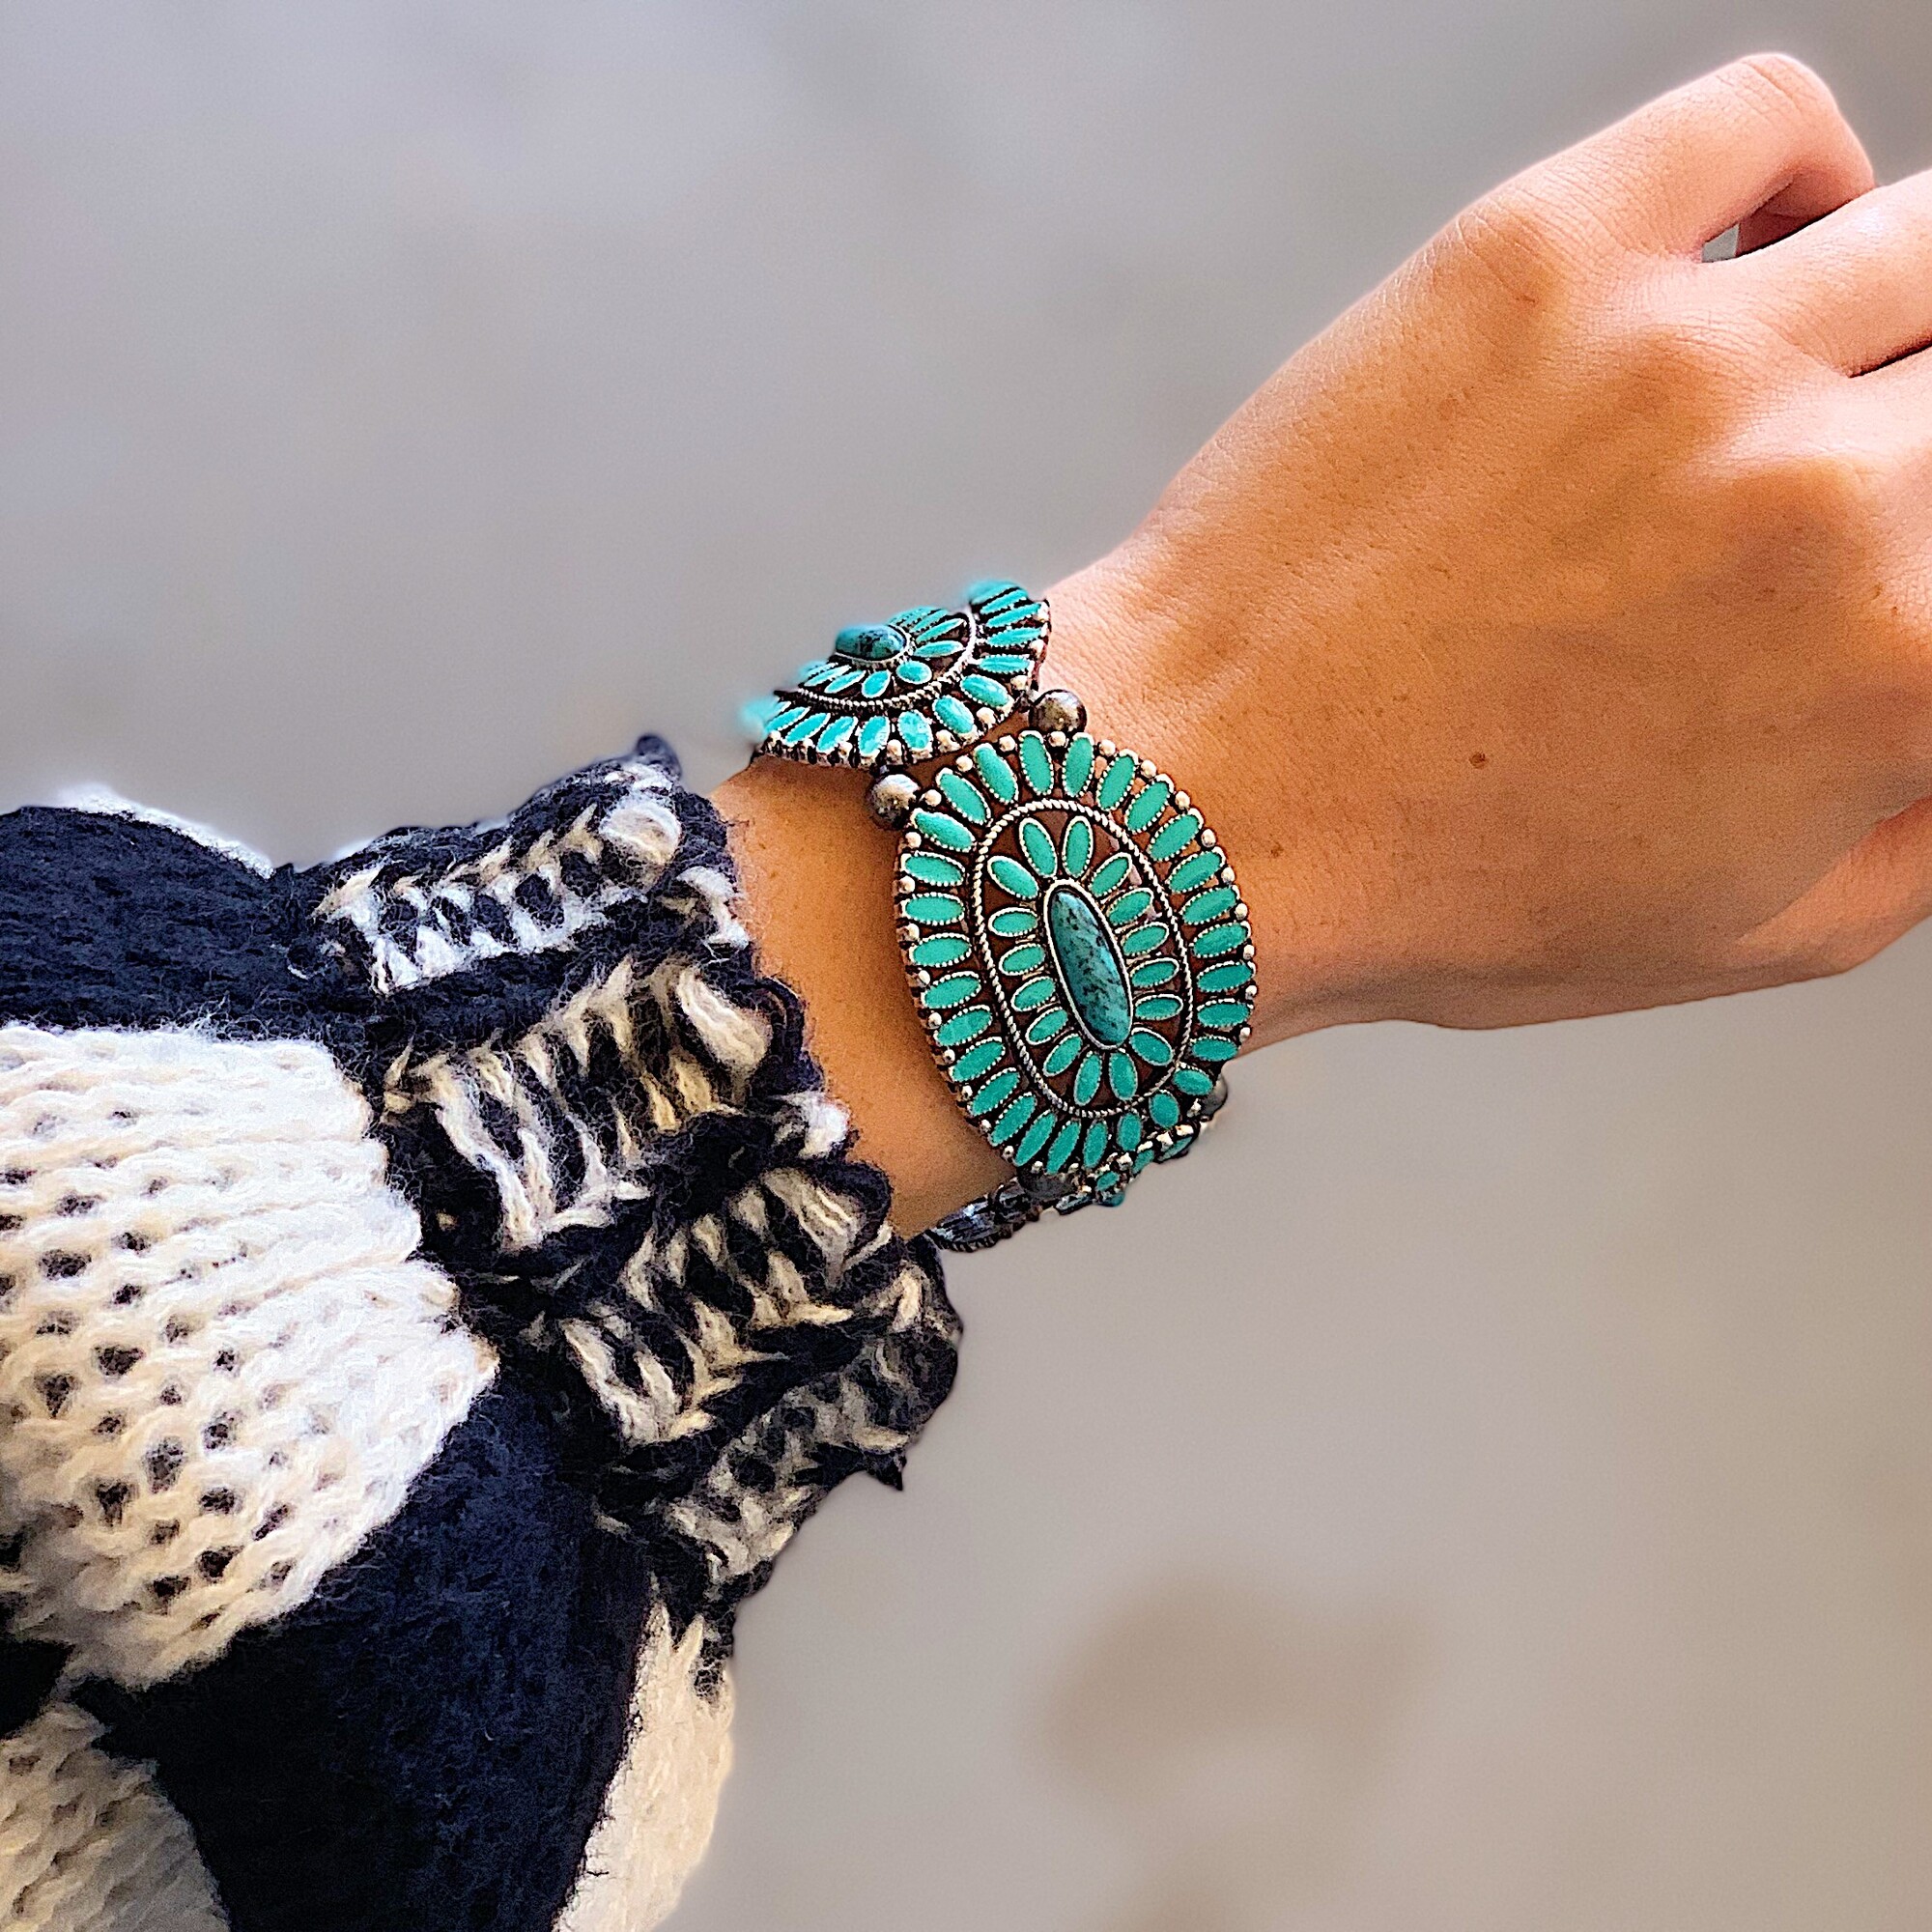 These beautiful turquoise bracelets are stretchable for a wide variety of sizes!